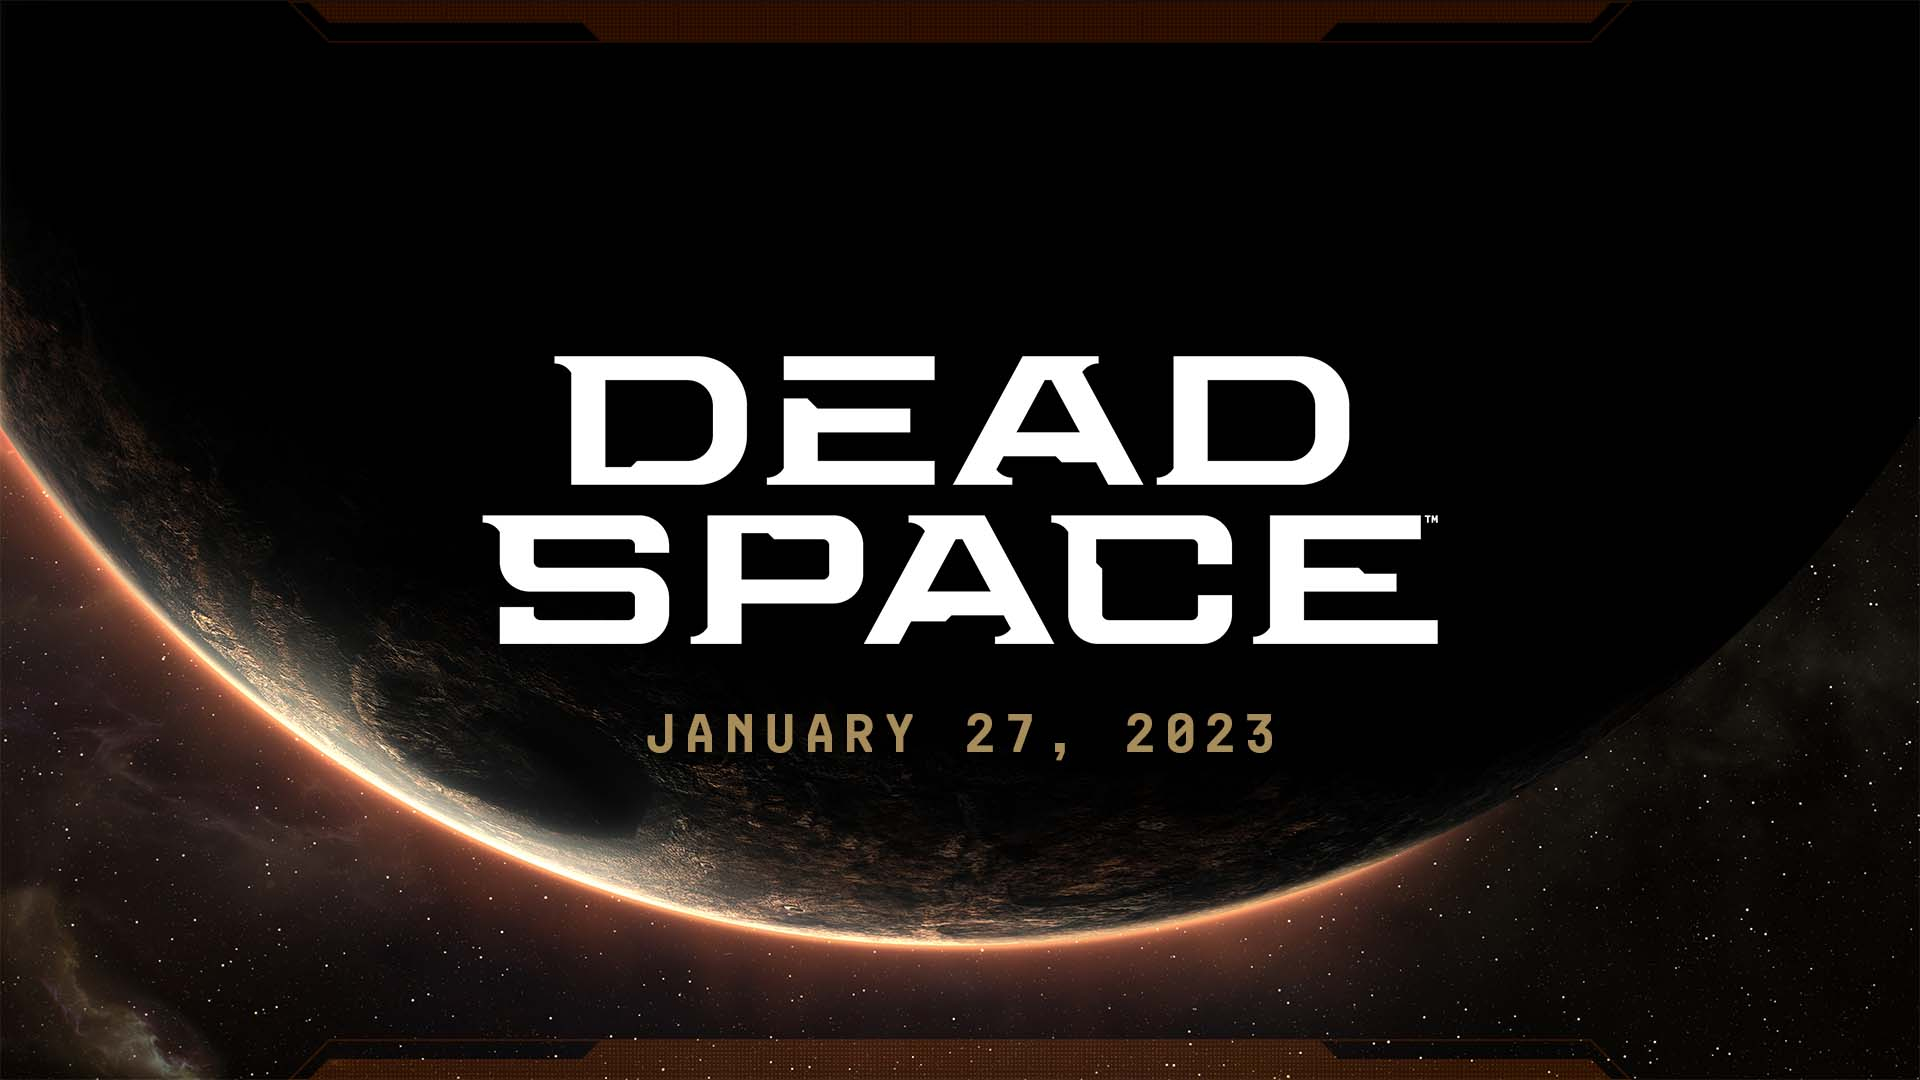 Electronic Arts Sci Fi Survival Horror Is Back When Dead Space Launches January 2023 For PlayStation Xbox Series X. S And PC